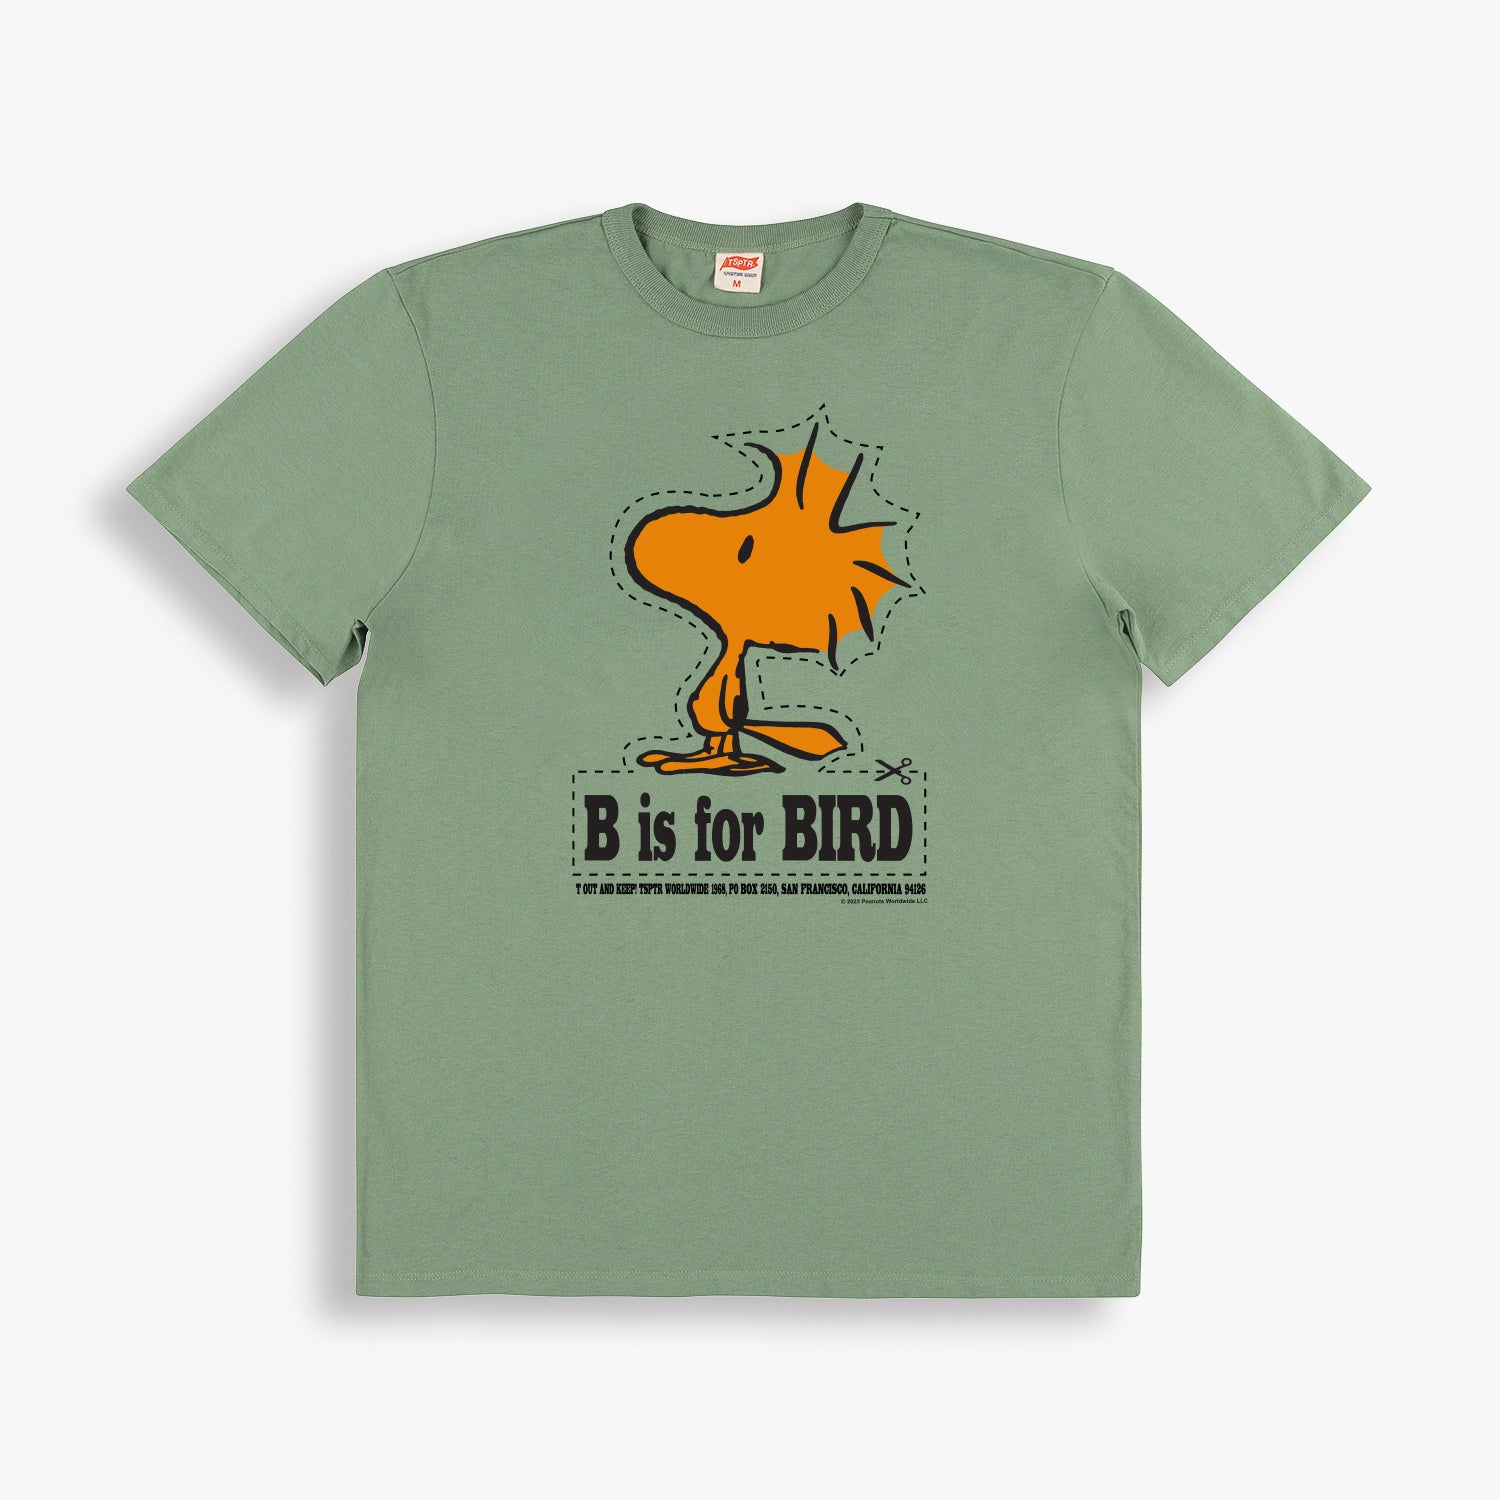 B IS FOR Tee